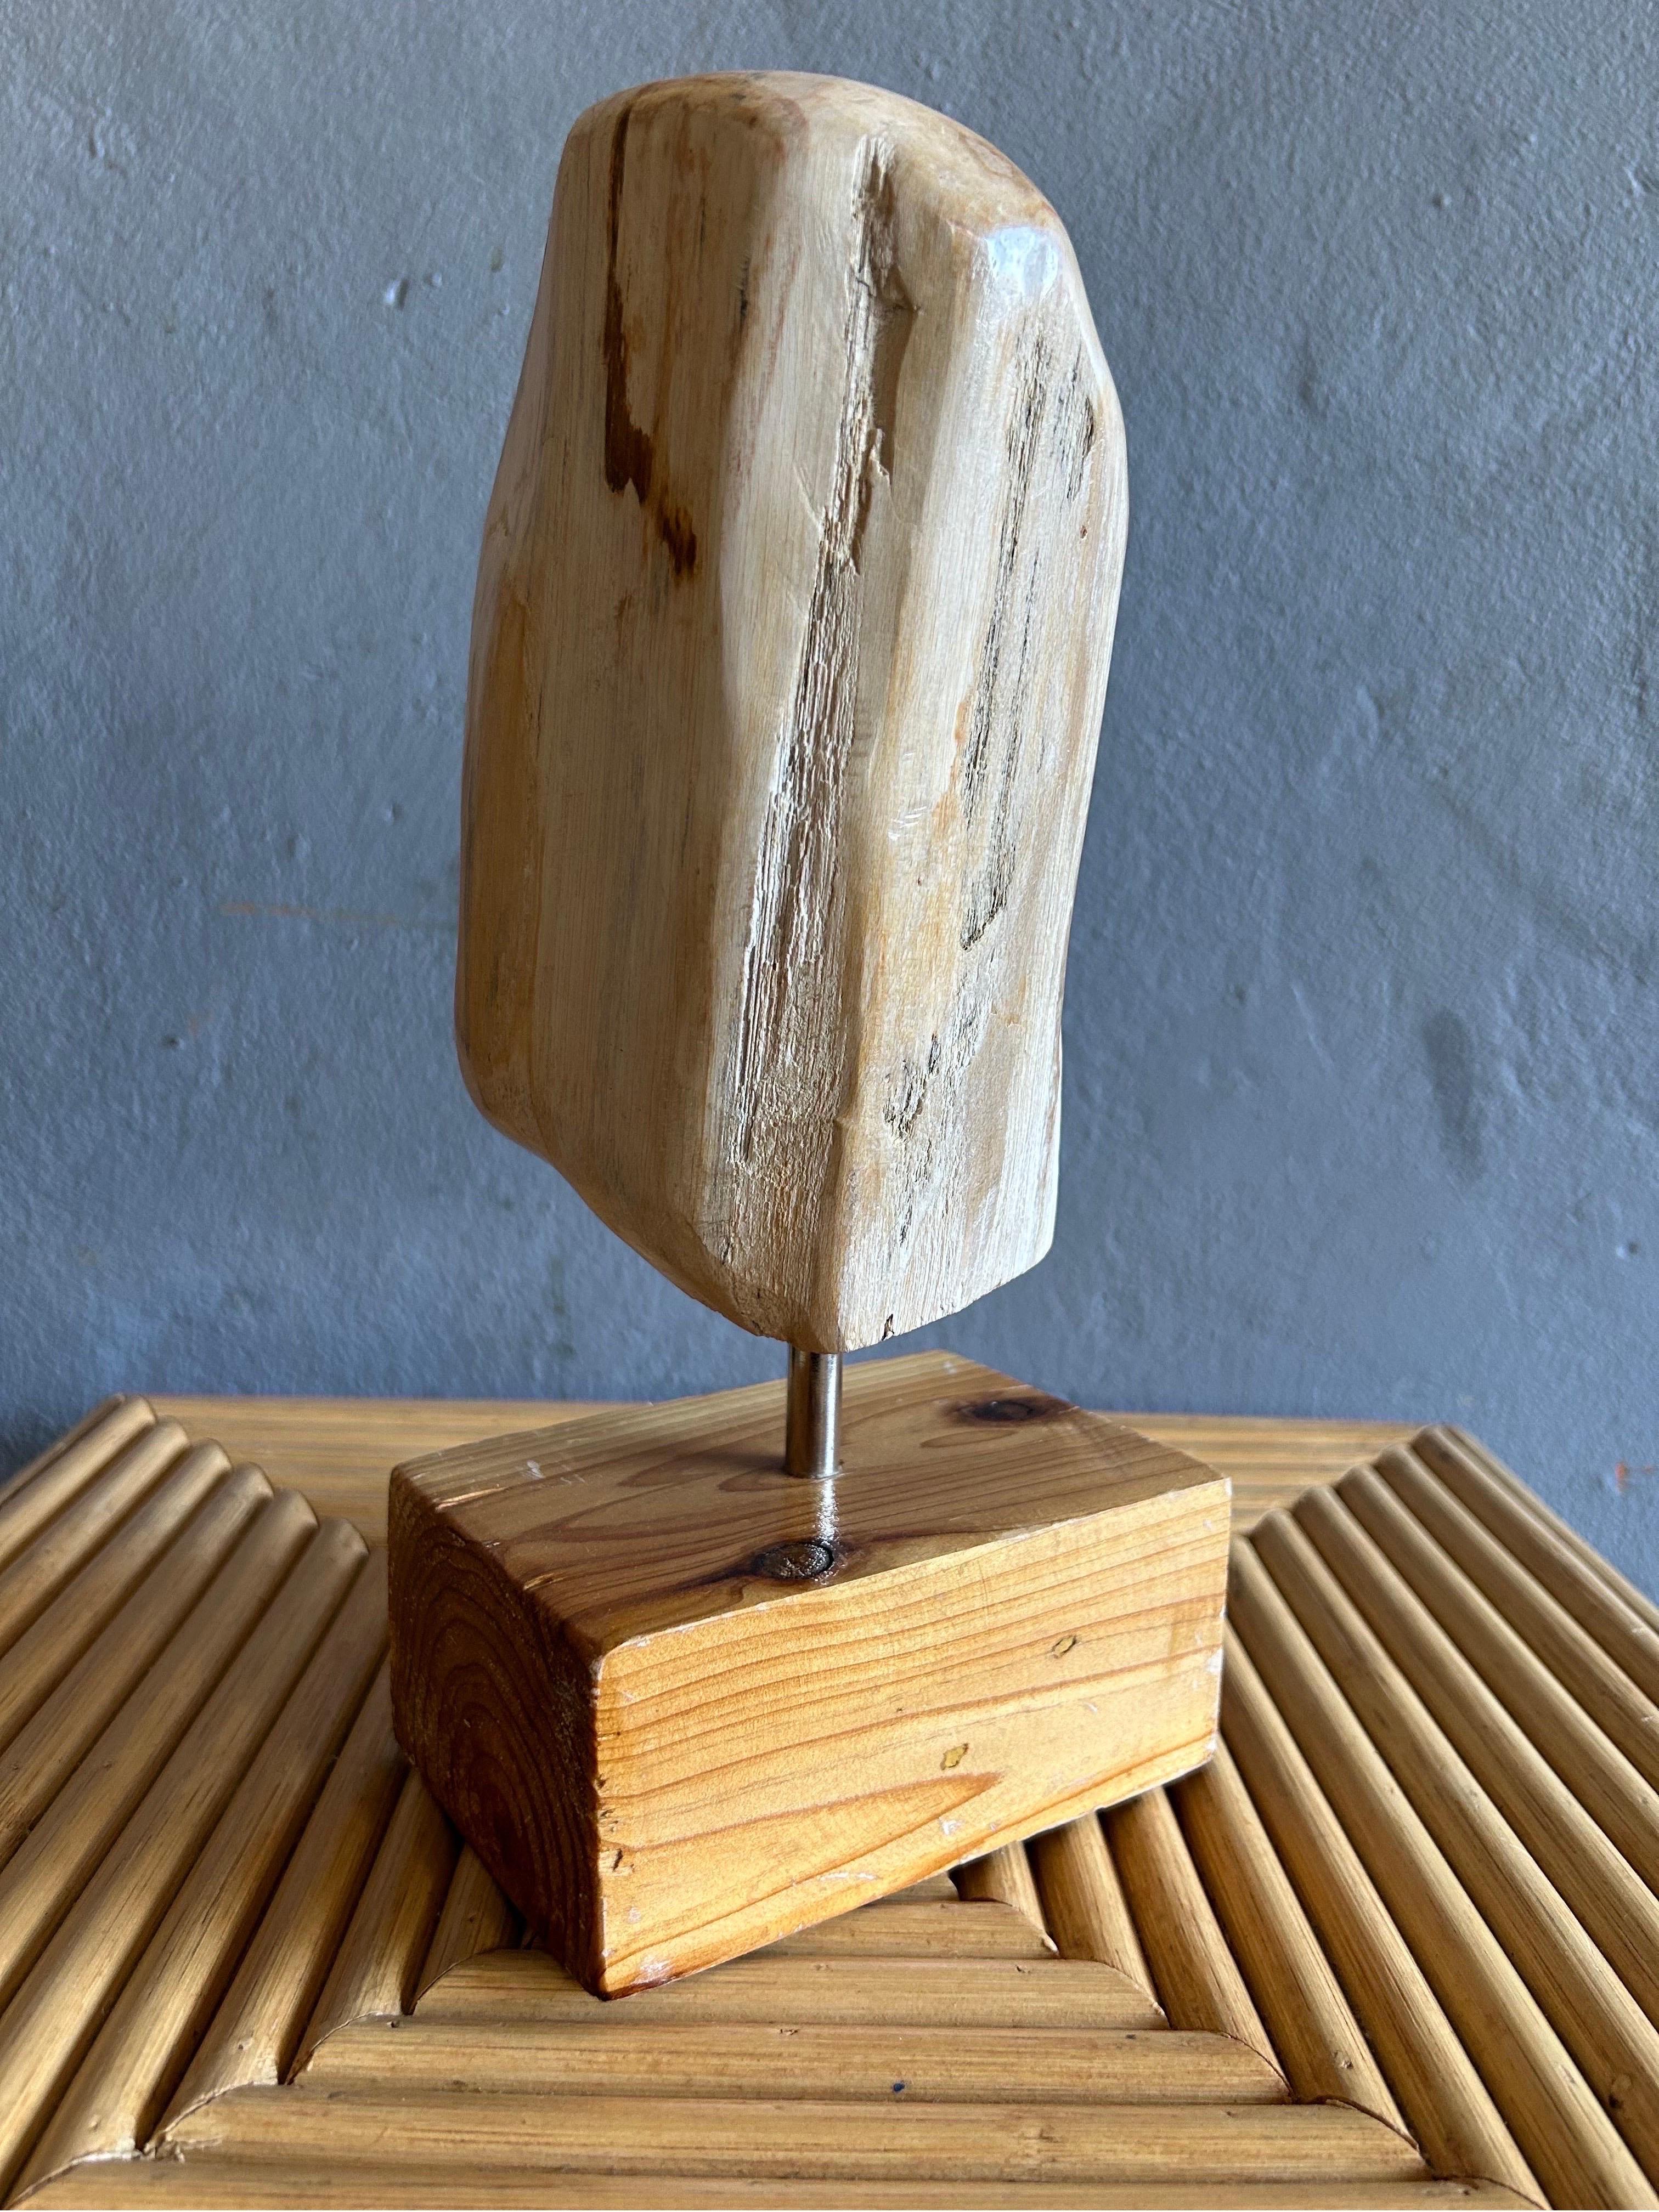 stone and wood sculpture